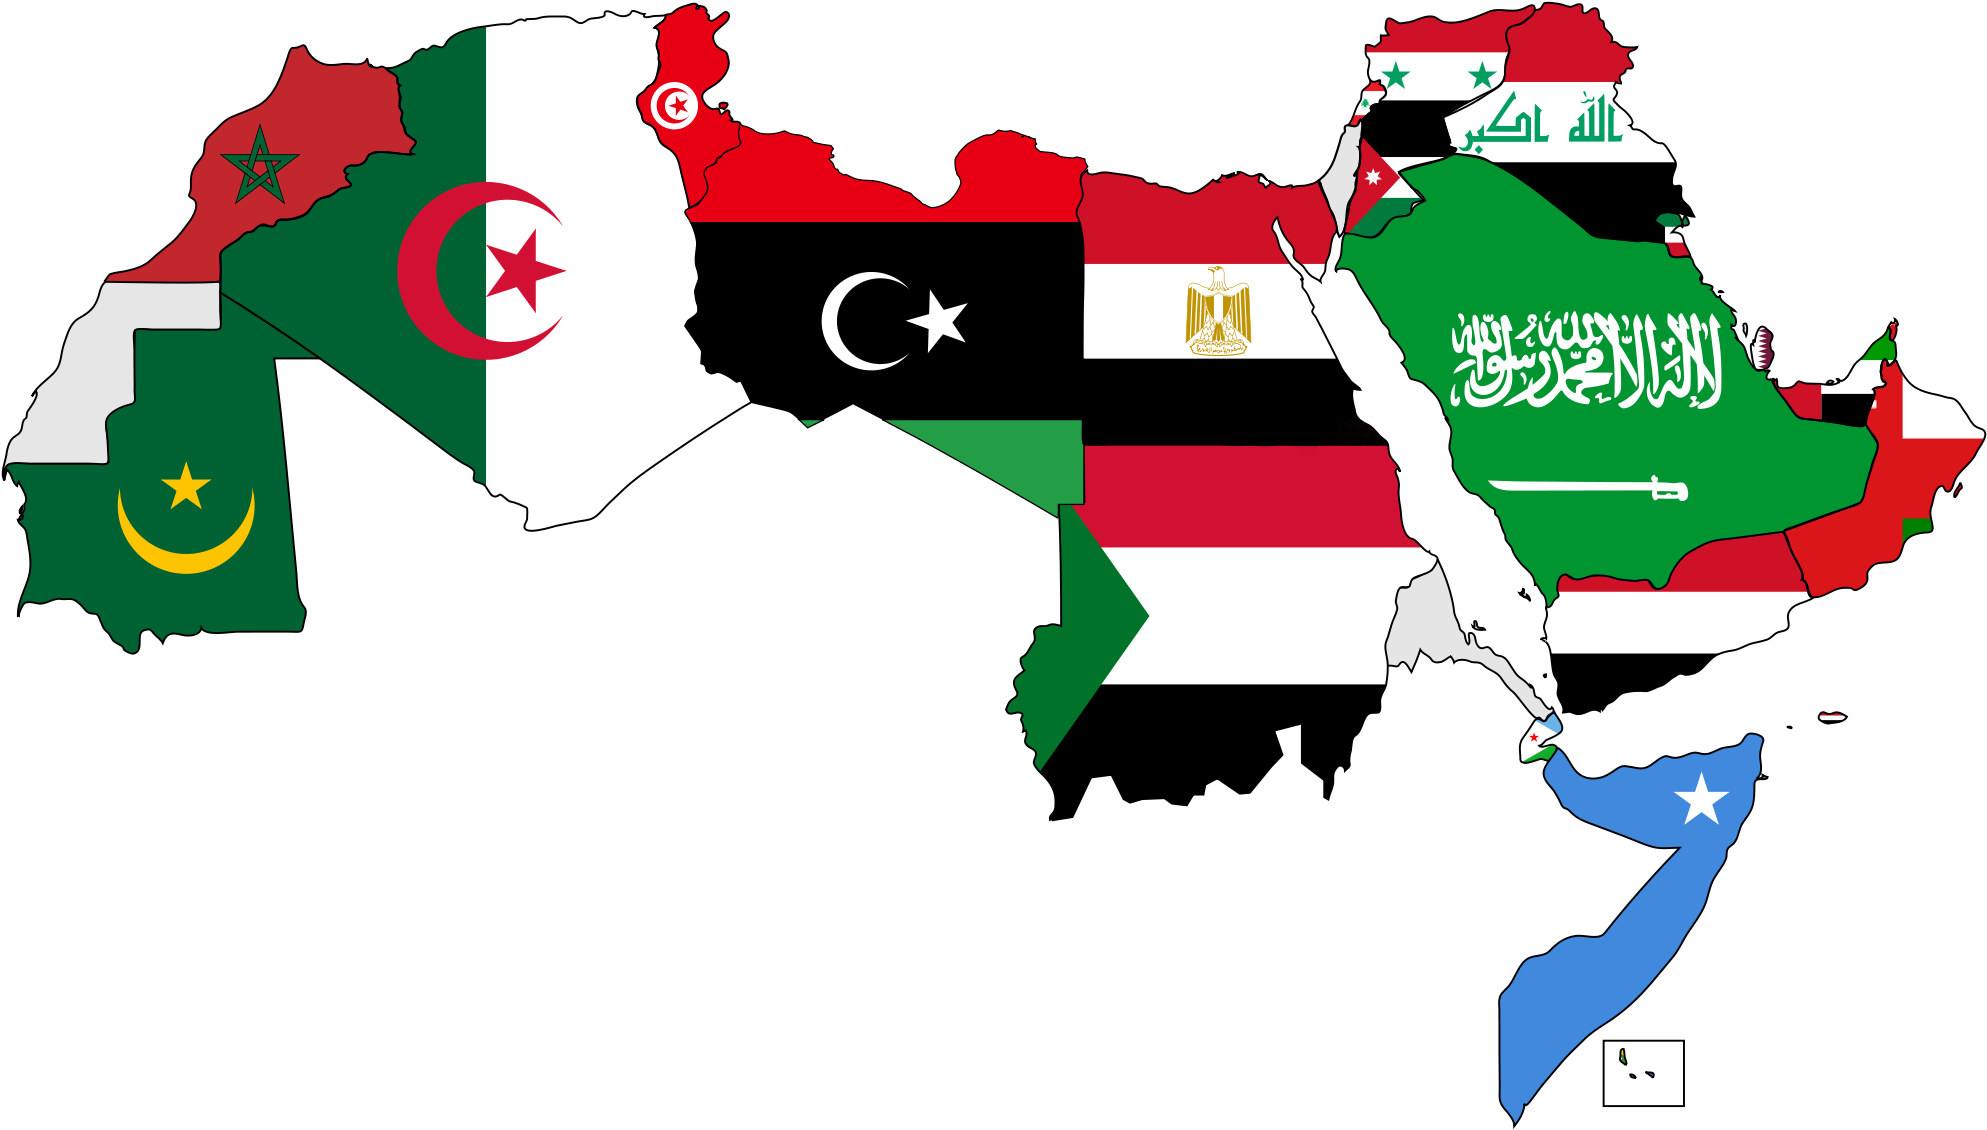 A Map Of The Arab World With Flags - Learn And Memorize Arabic Vocabulary (2000x1139)